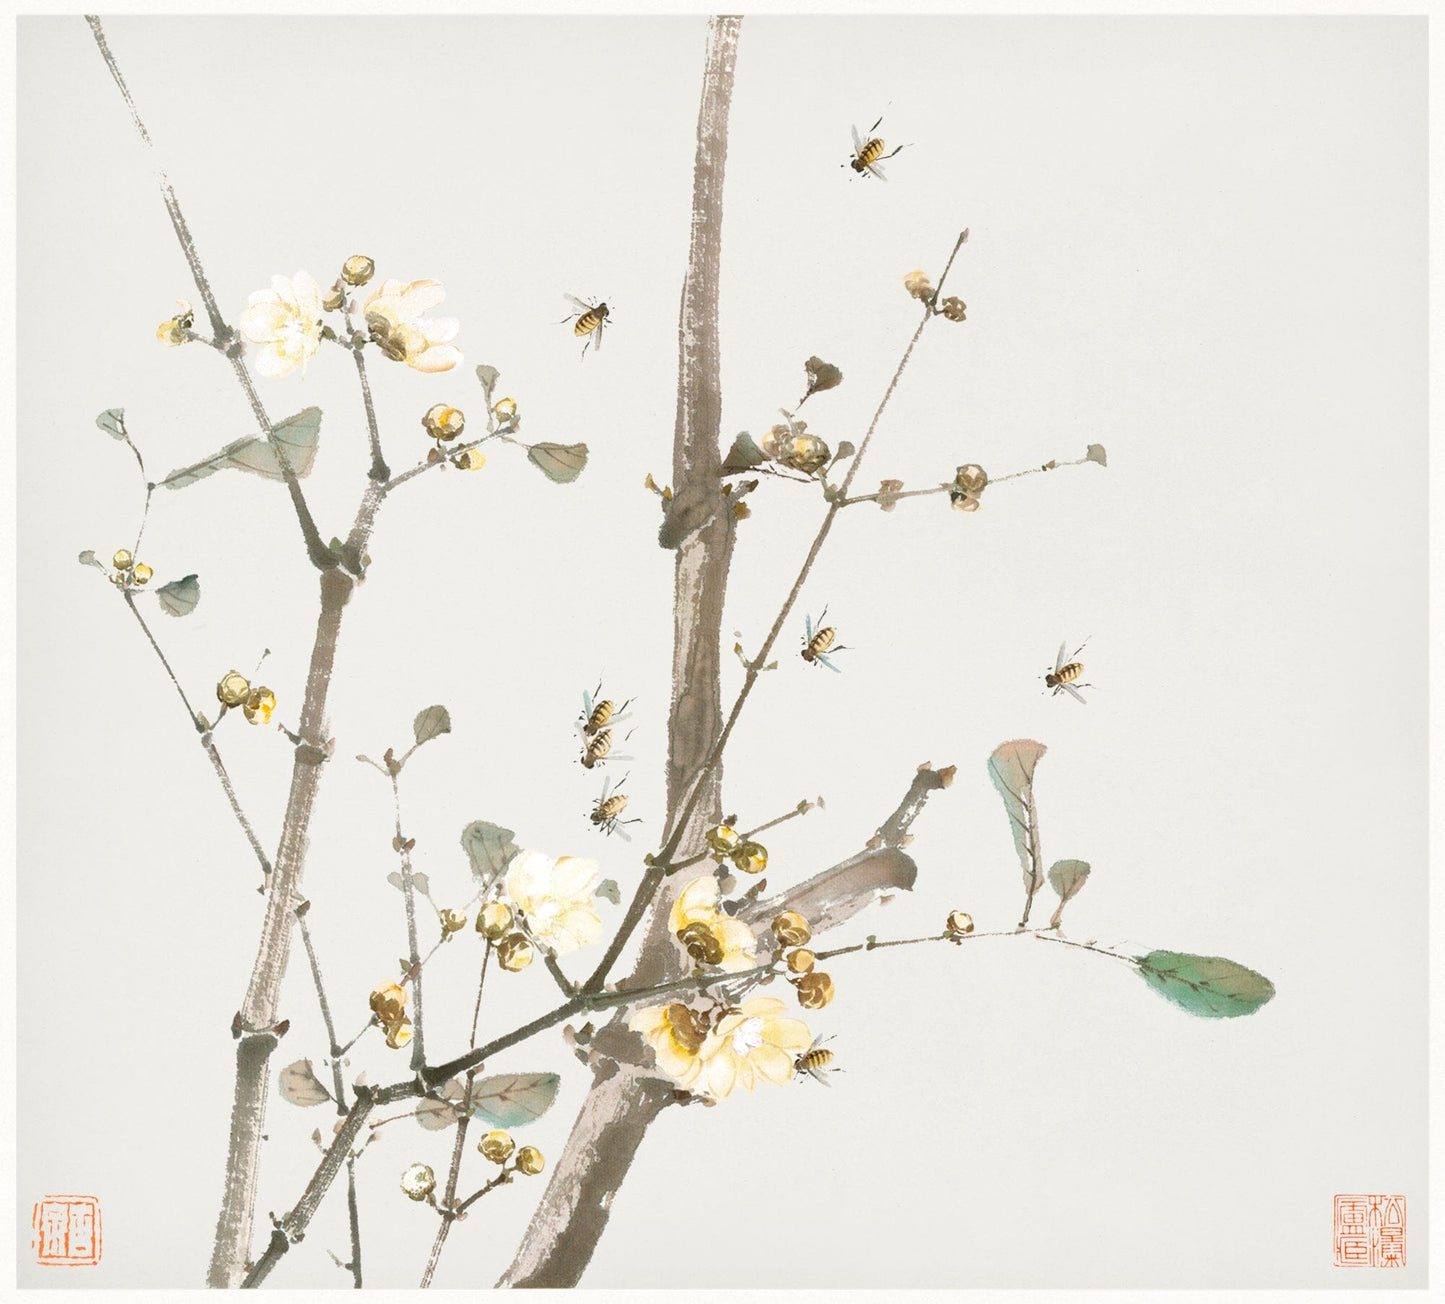 Bees and flowers | Vintage Asian wall art | Ju Lian (1600s Qing dynasty) Posters, Prints, & Visual Artwork The Trumpet Shop   